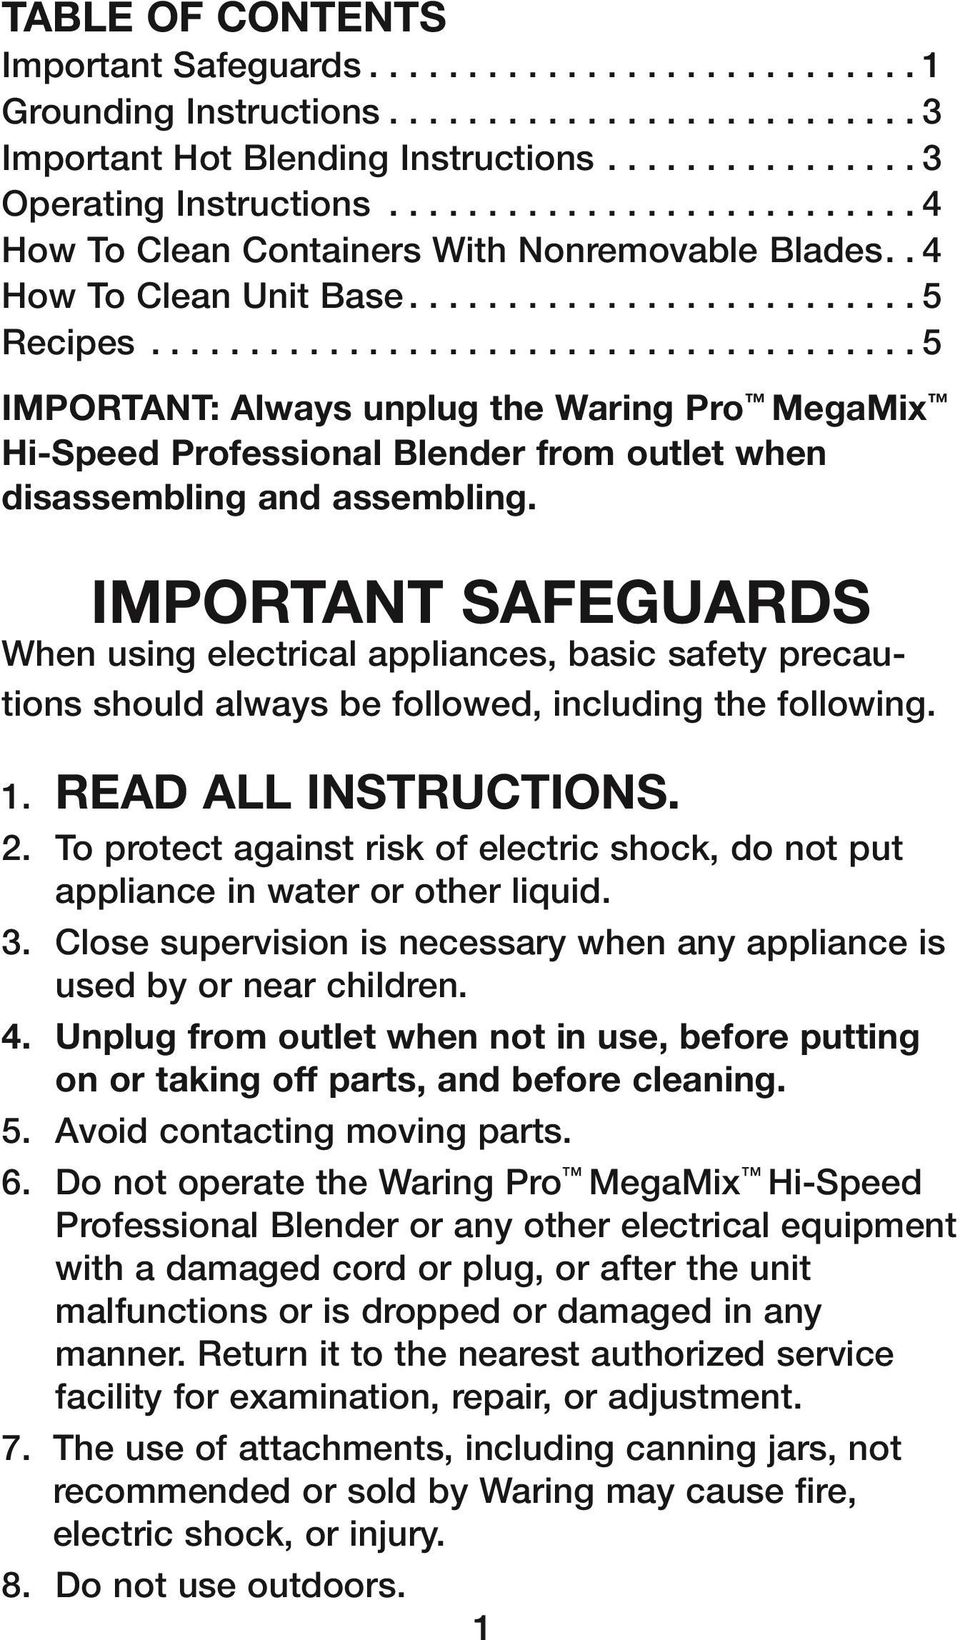 ...................................... 5 IMPORTANT: Always unplug the Waring Pro MegaMix Hi-Speed Professional Blender from outlet when disassembling and assembling.